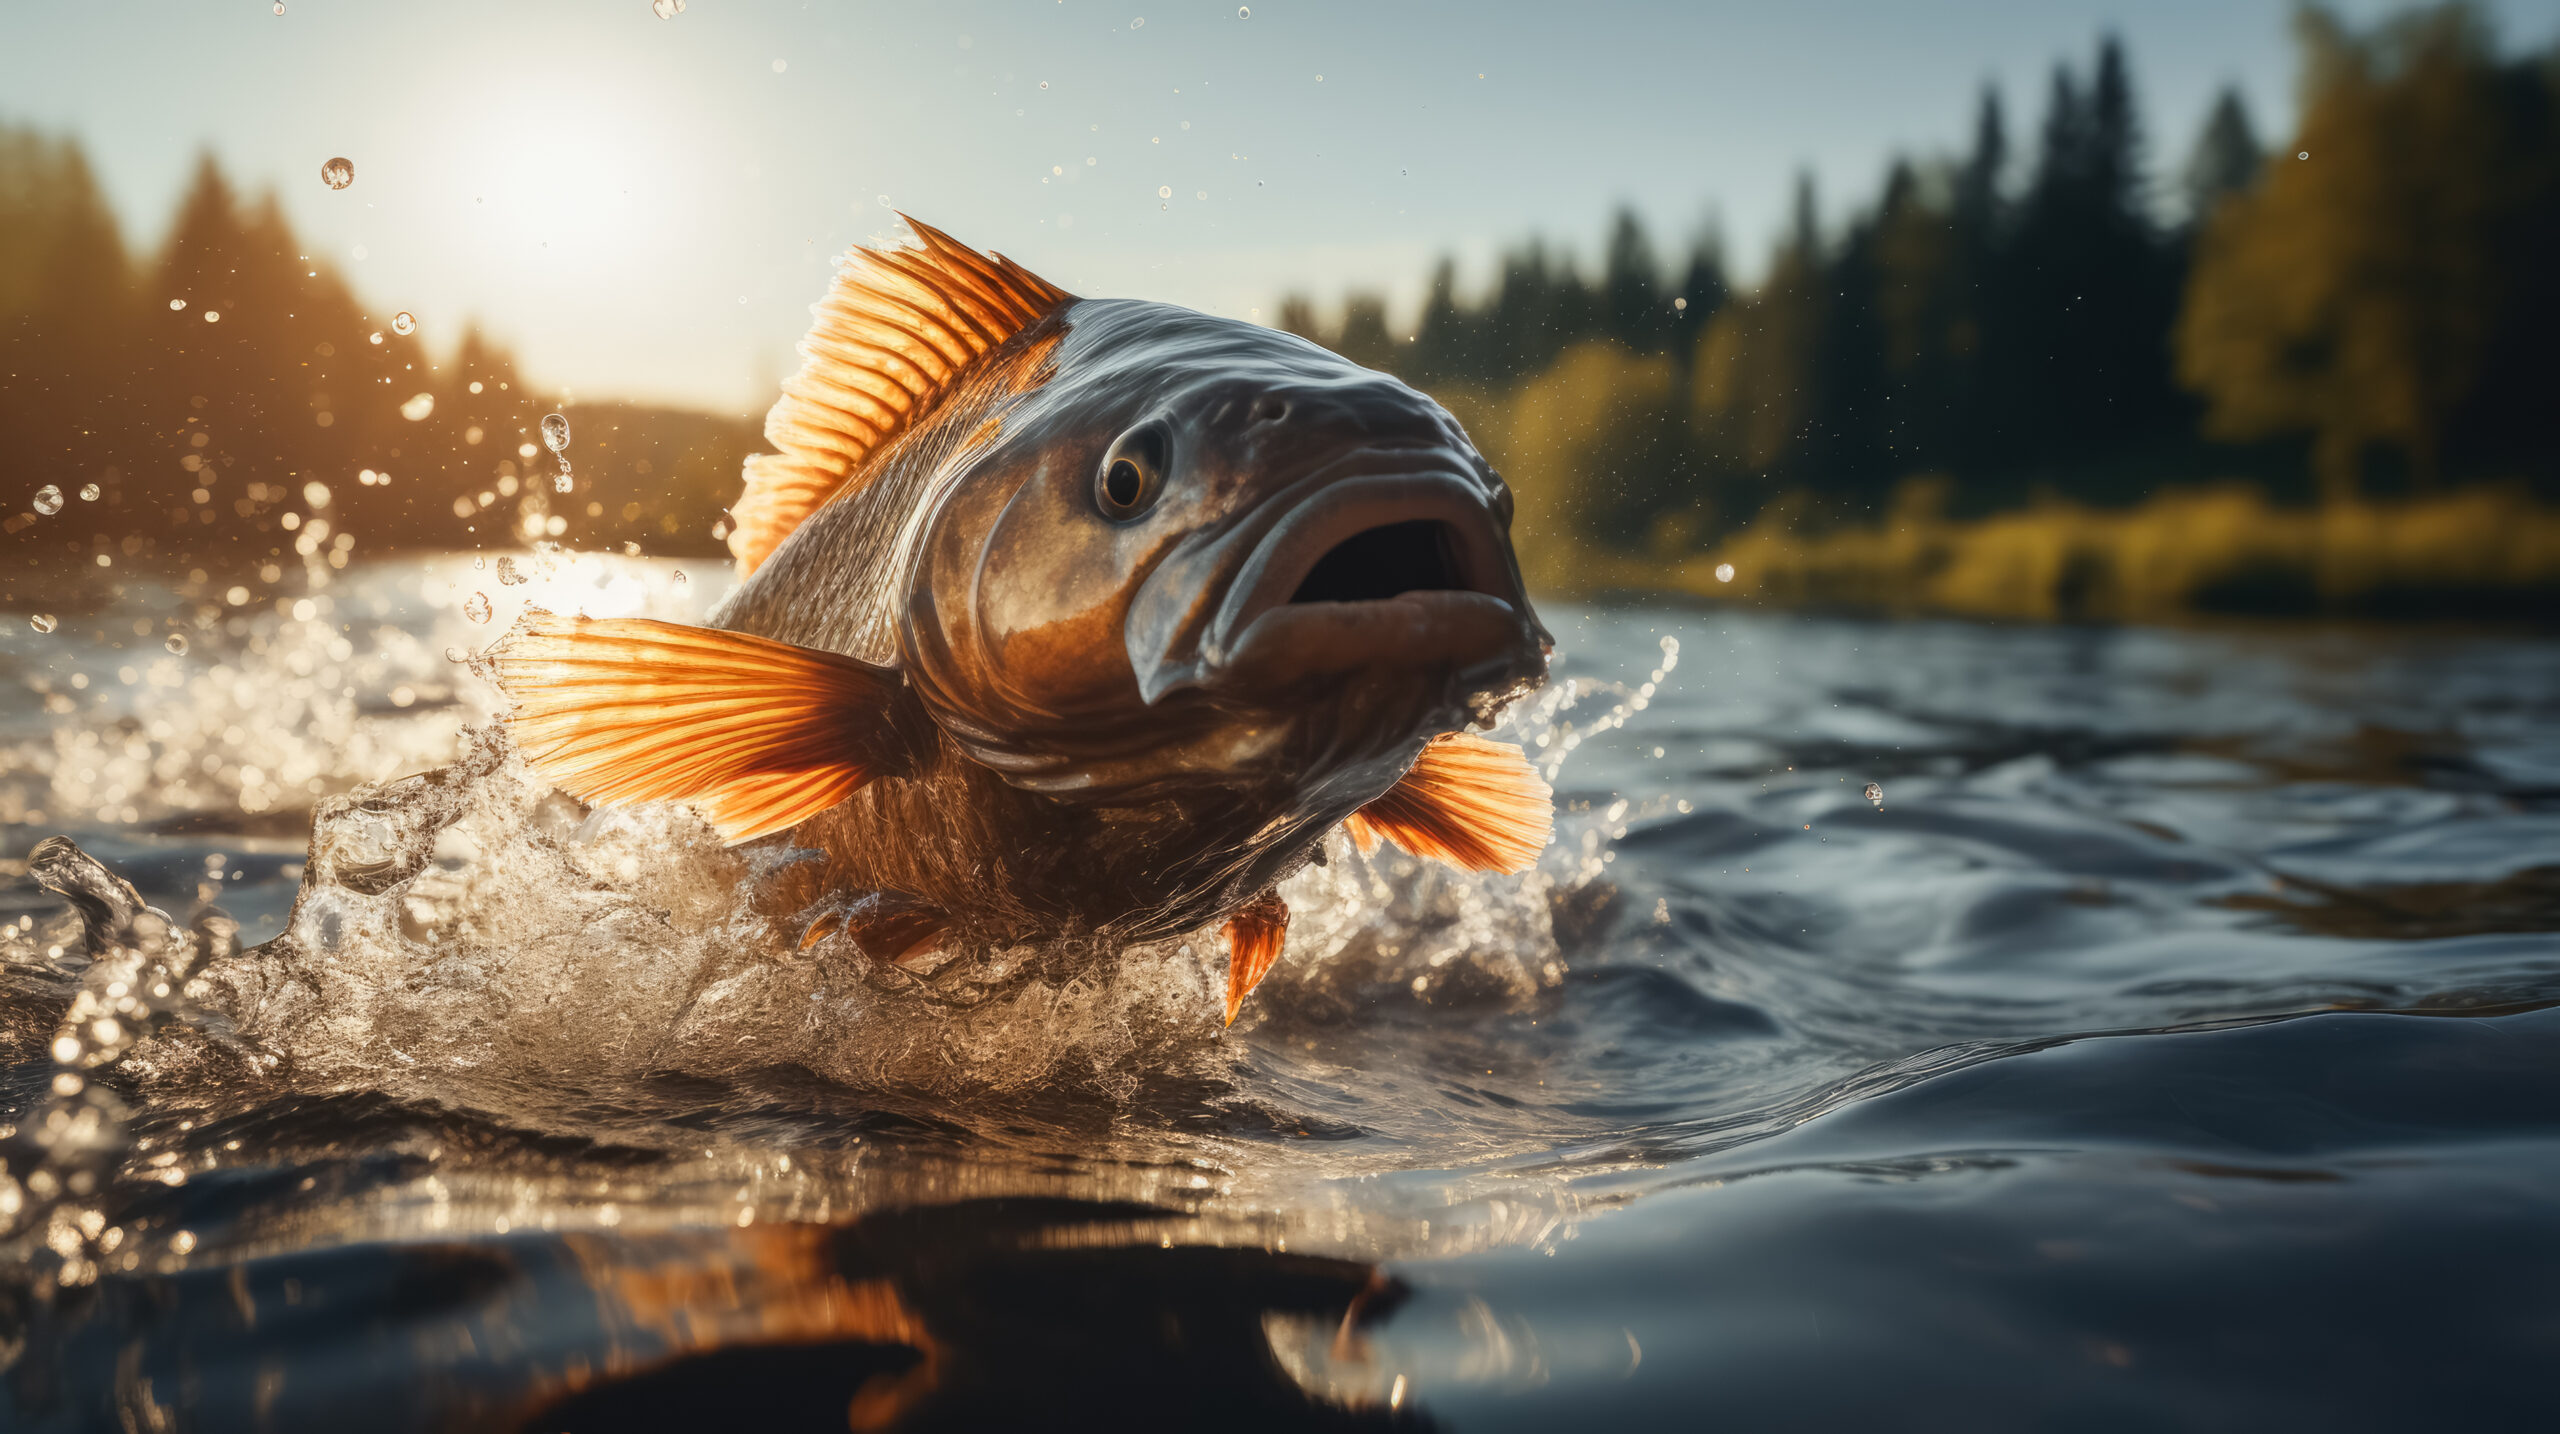 fanatic4fishing.com : What is the fastest fish to catch?